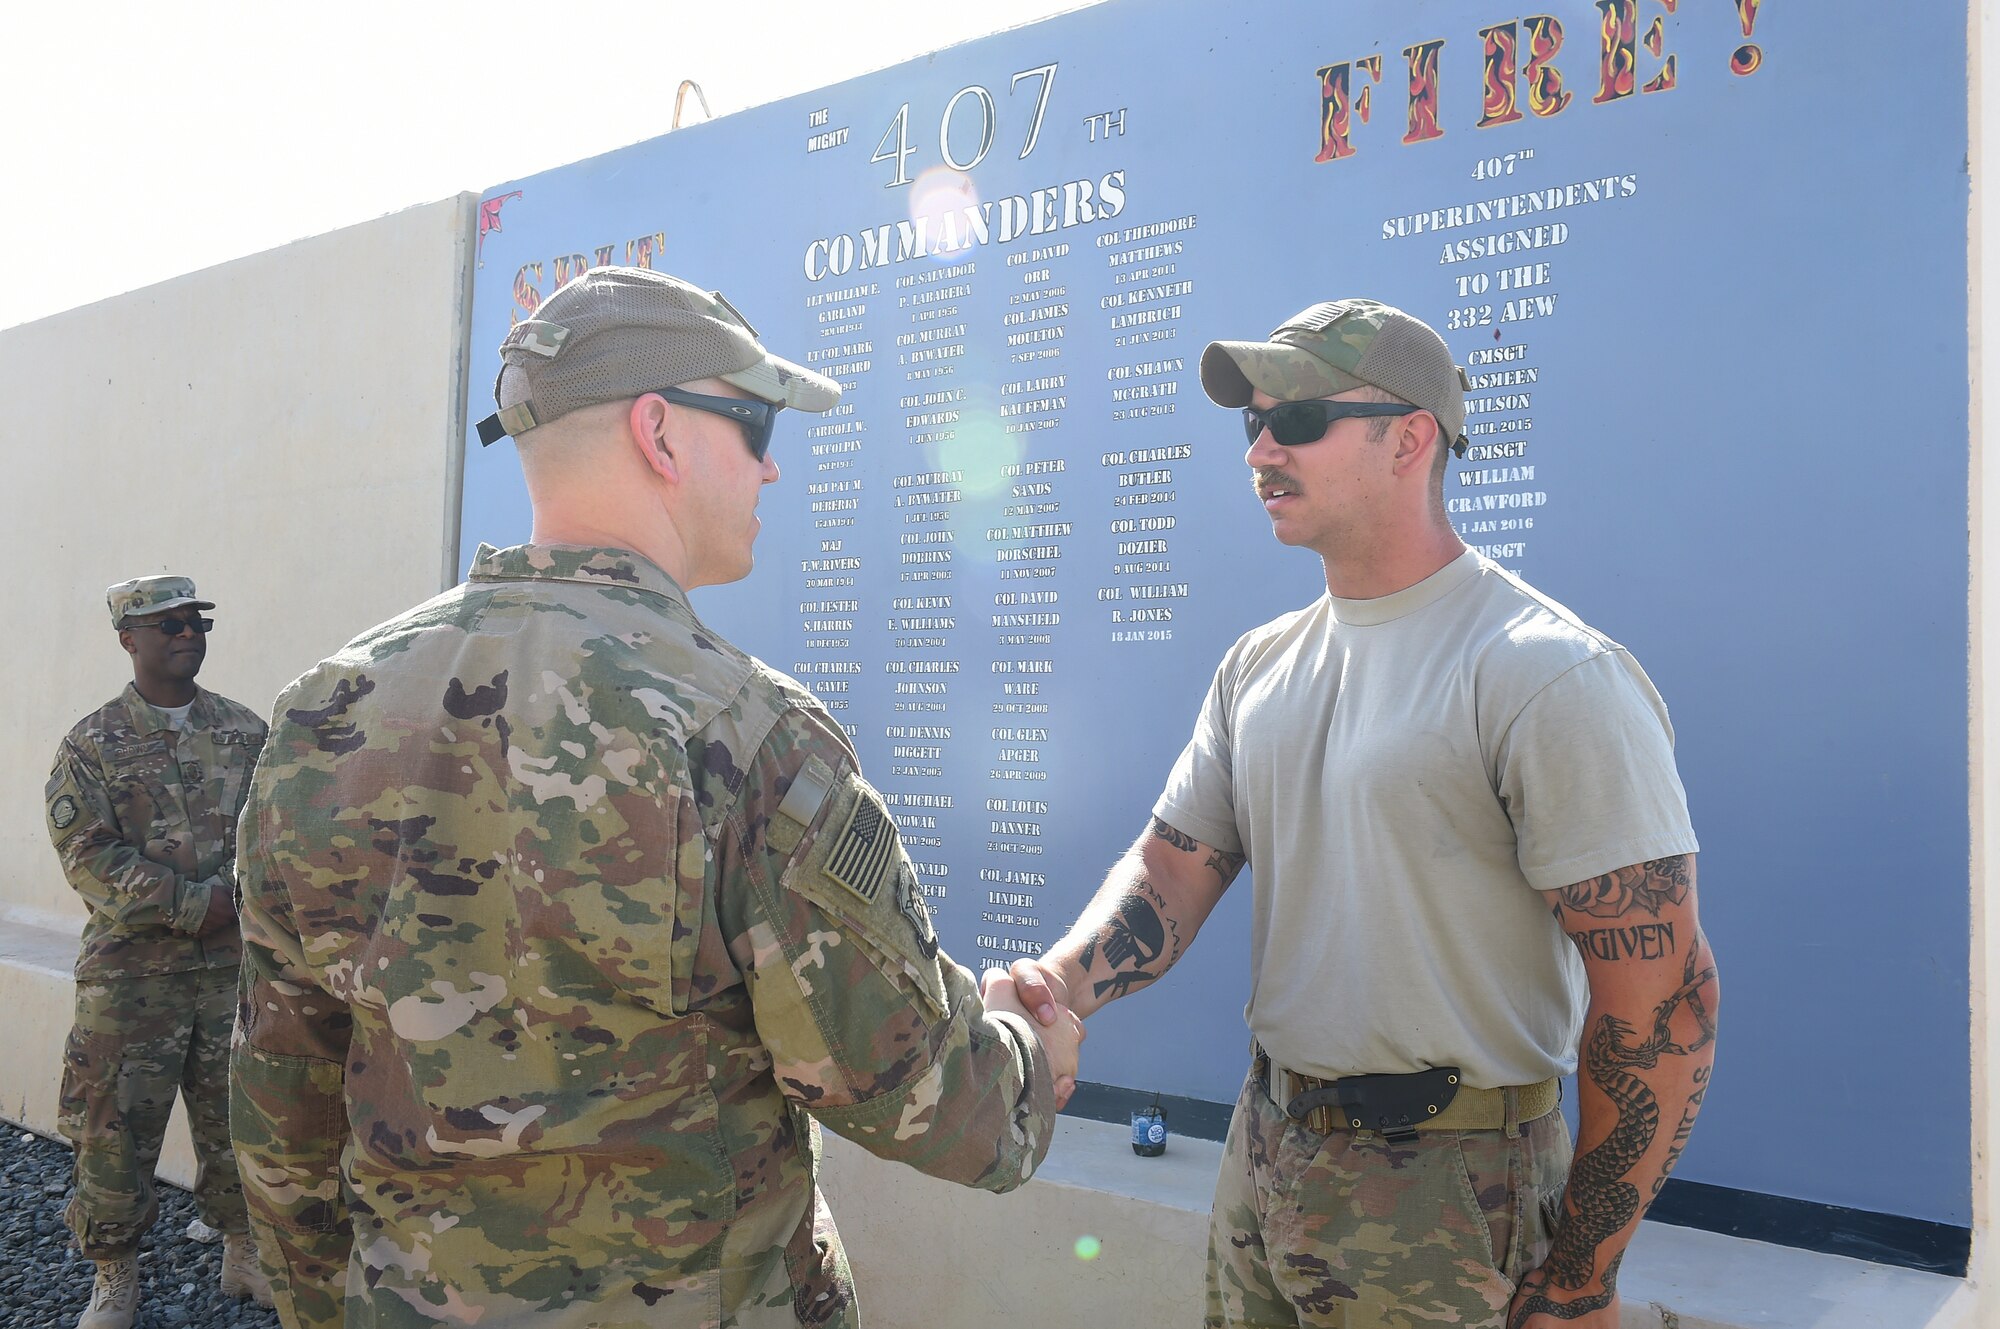 Col. shakes hands with Airman outside